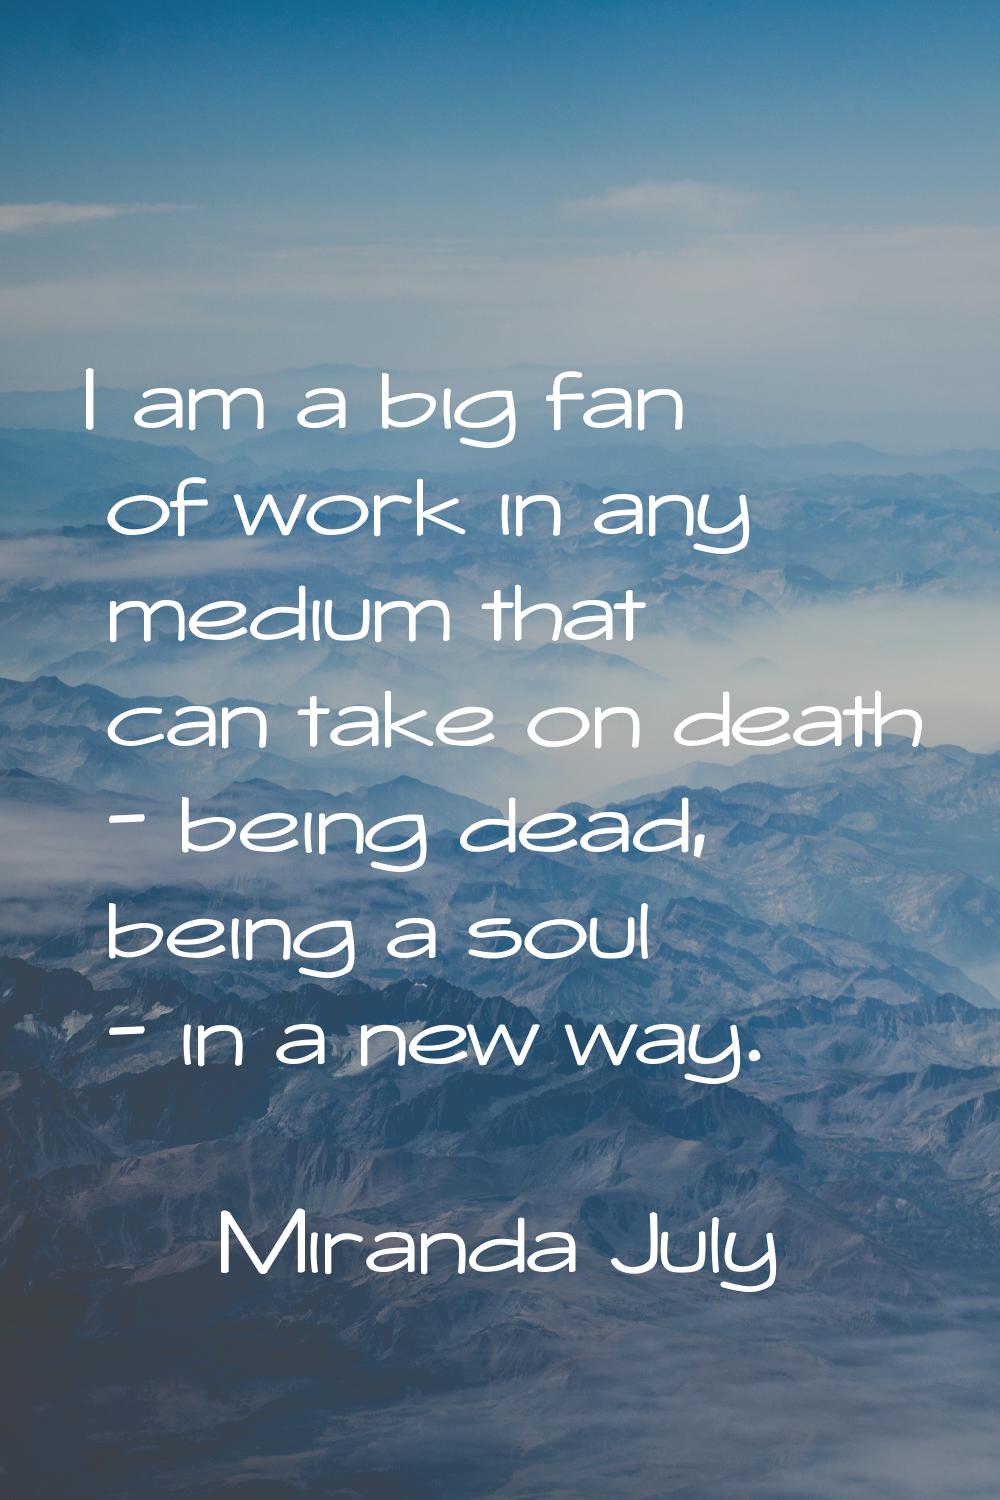 I am a big fan of work in any medium that can take on death - being dead, being a soul - in a new w